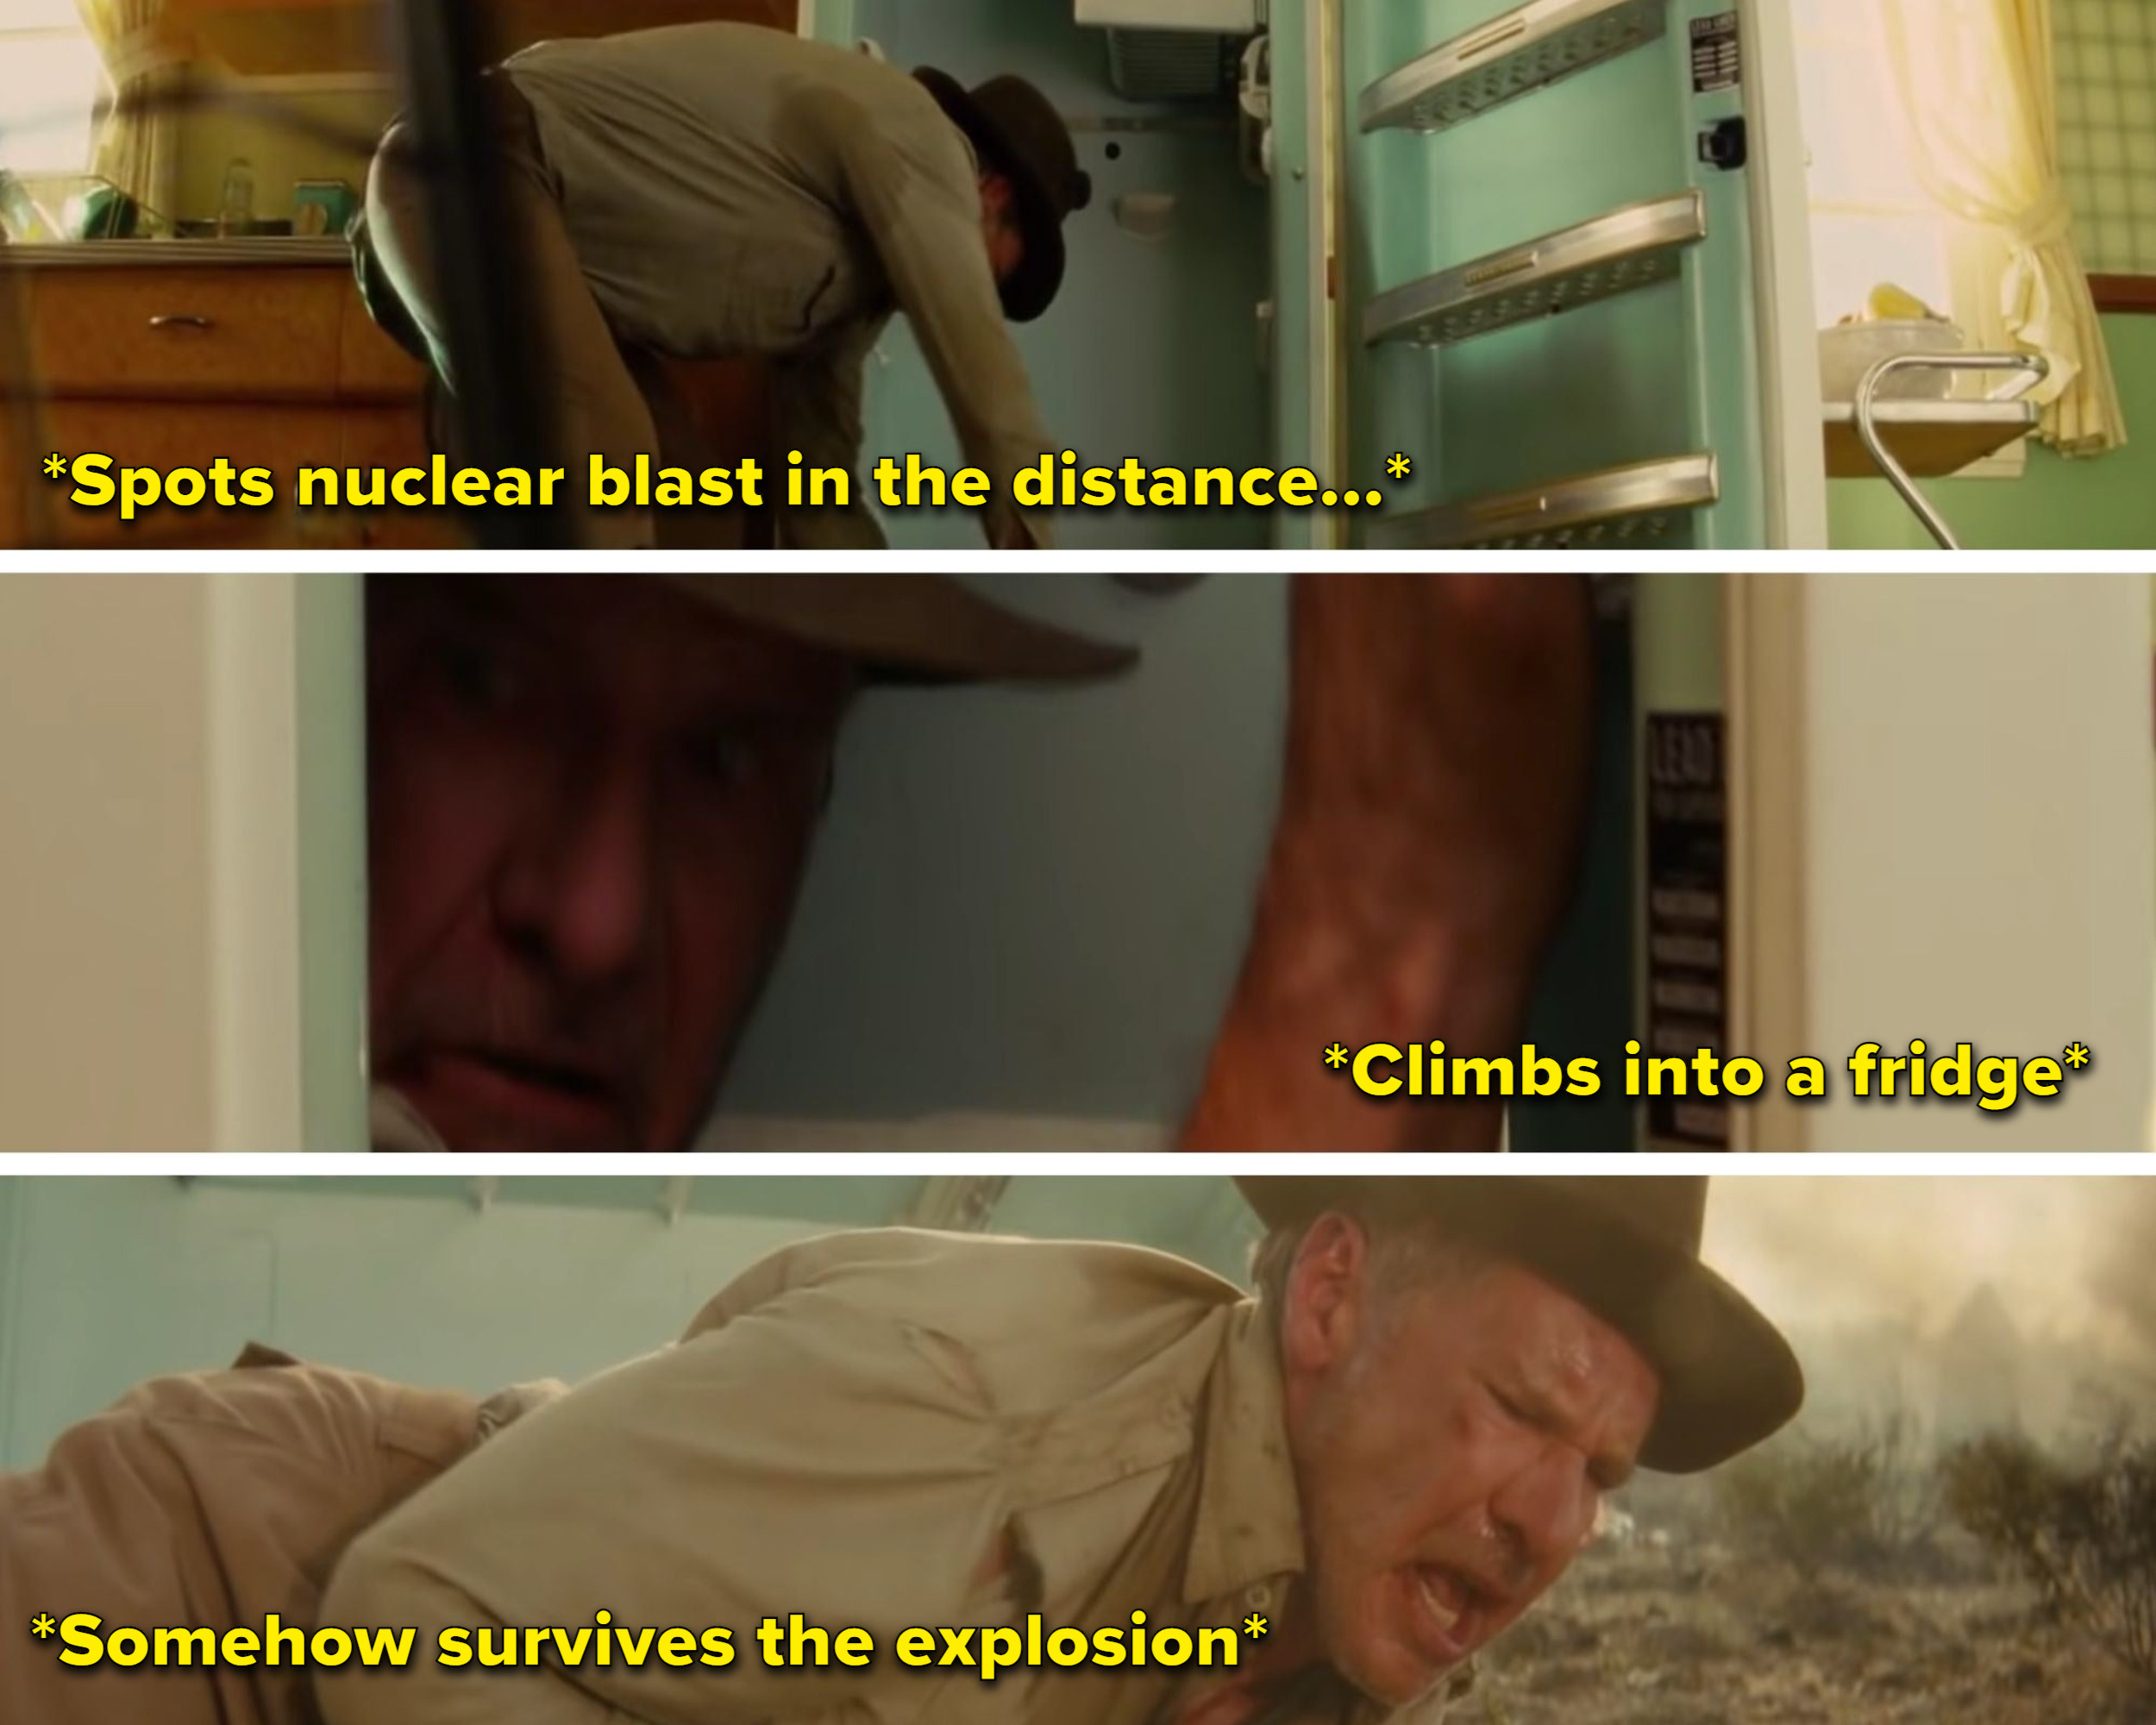 Breakdown of the scene in which Indiana Jones empties a fridge, climbs into it, and still survives a nuclear blast